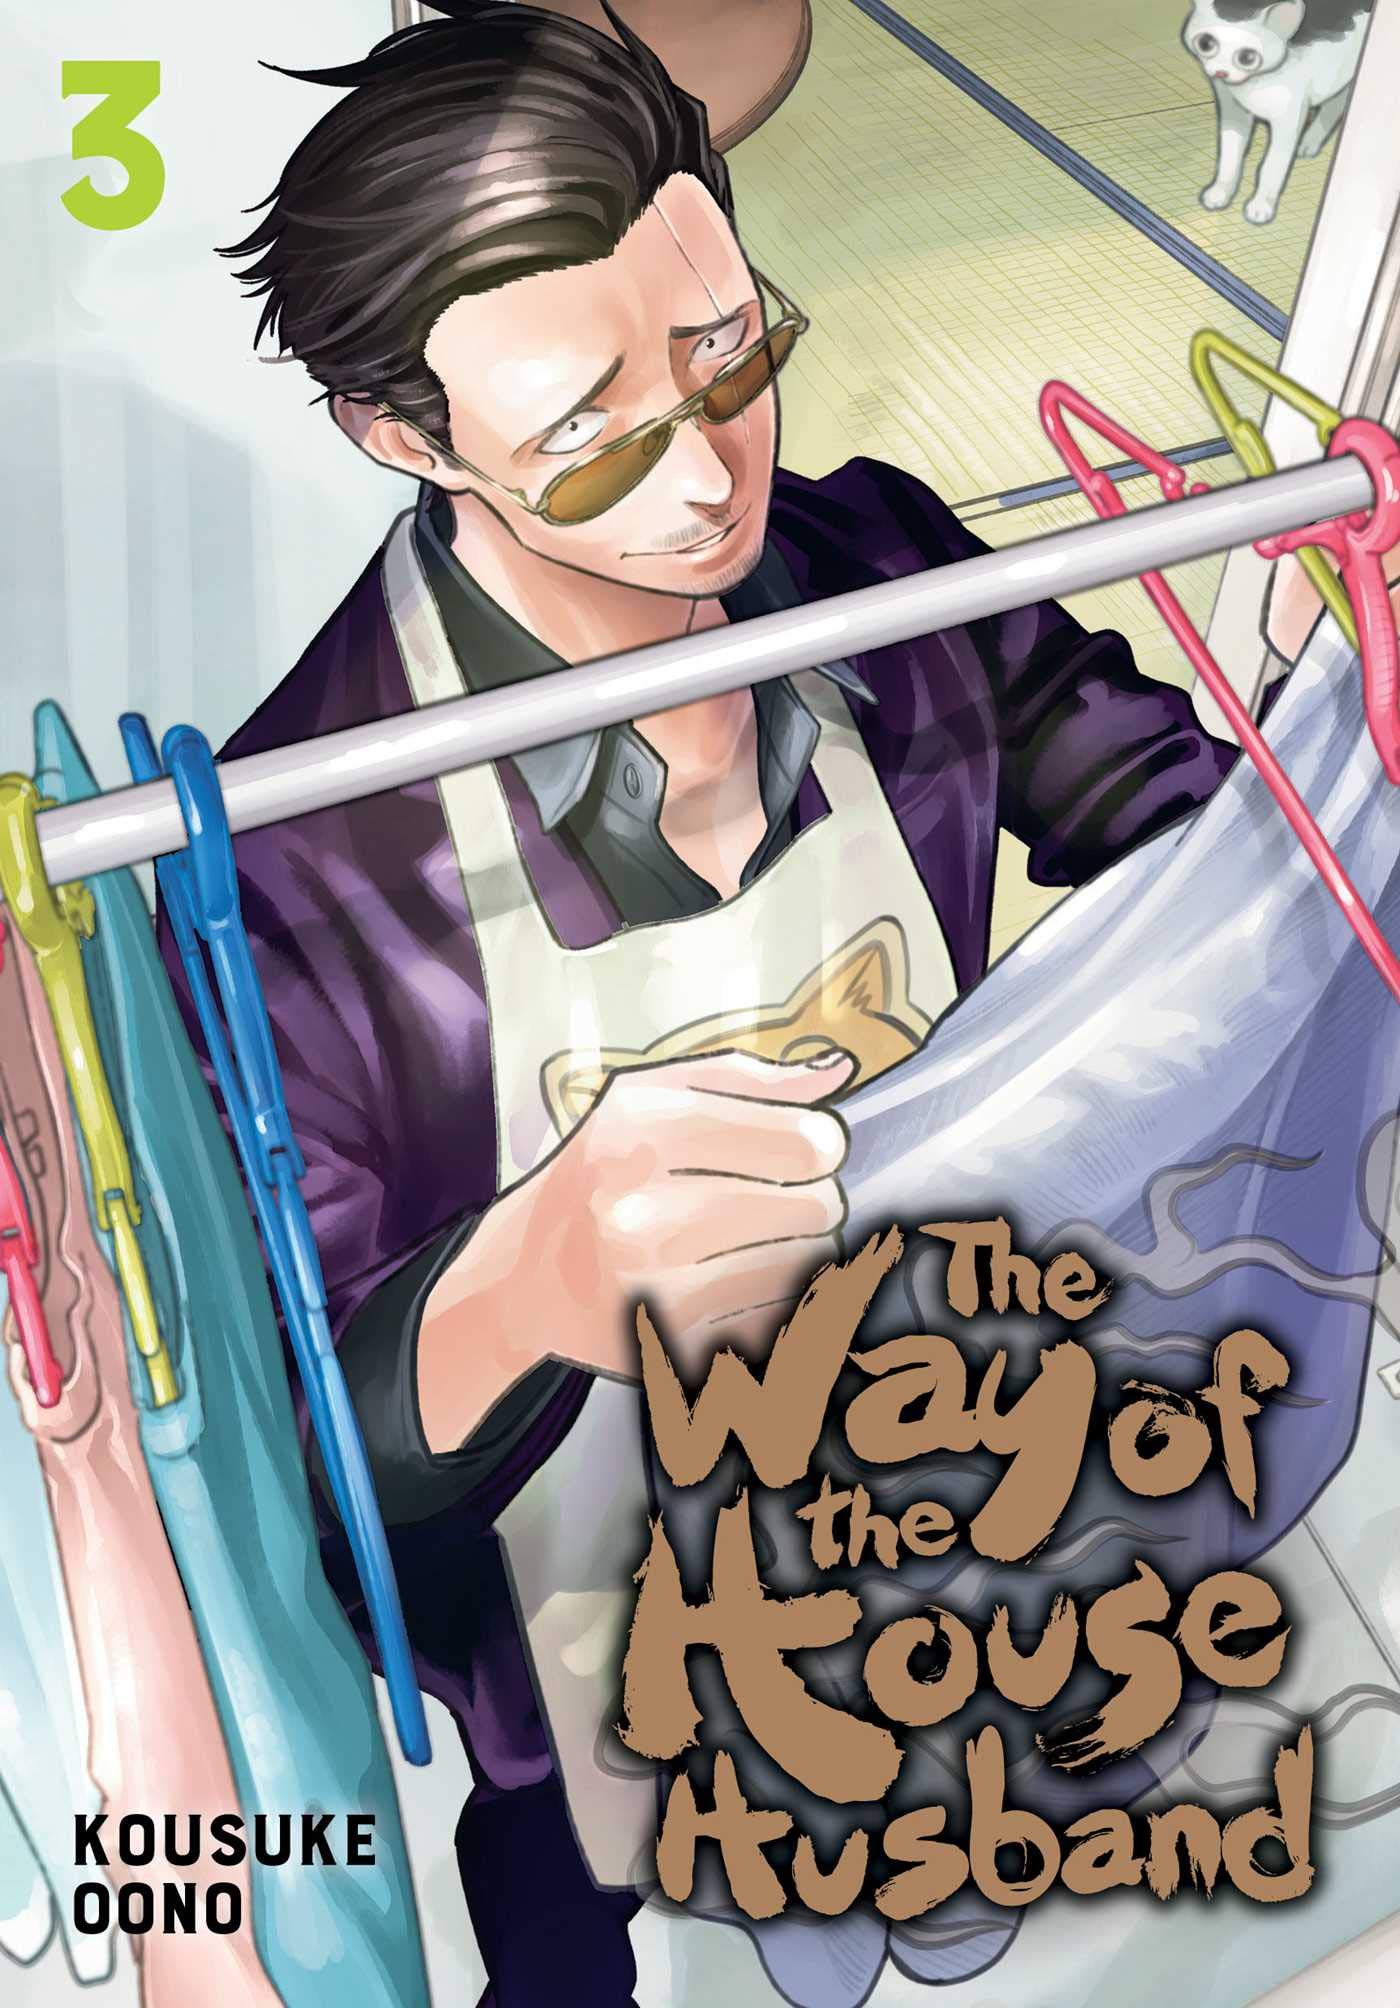 The Way of the Househusband - Volume 3